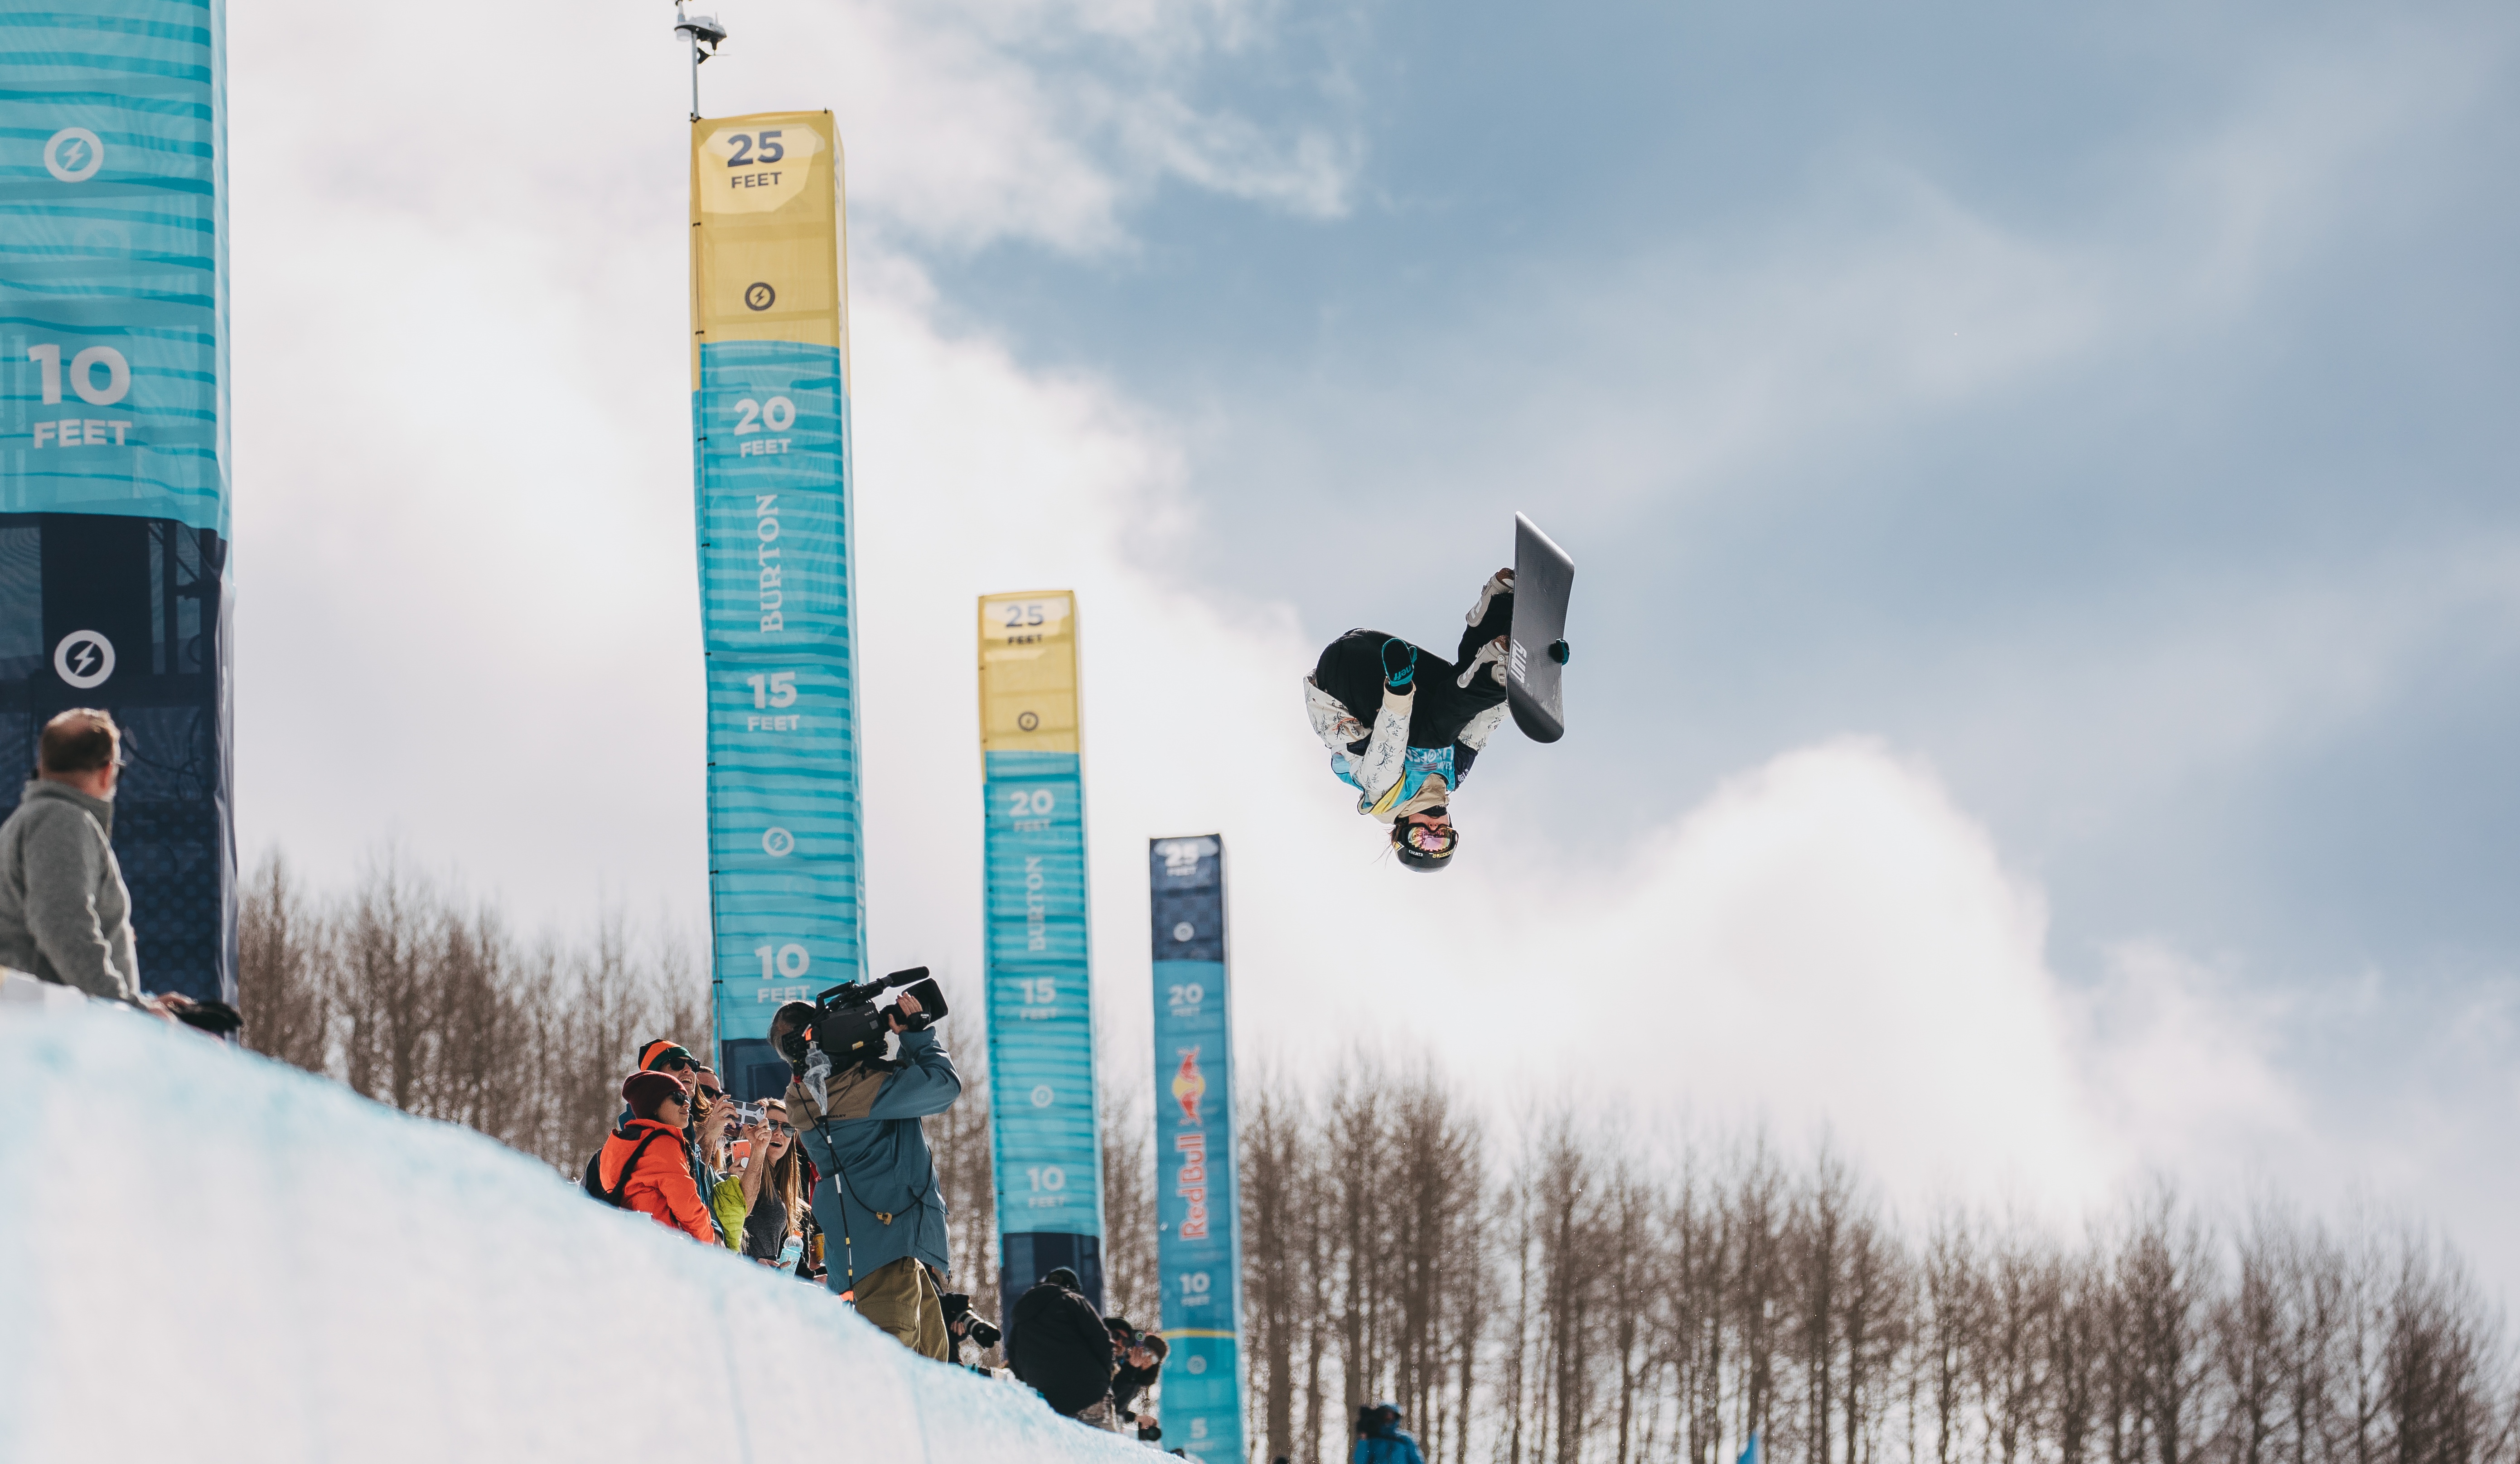 Arielle Gold at Vail